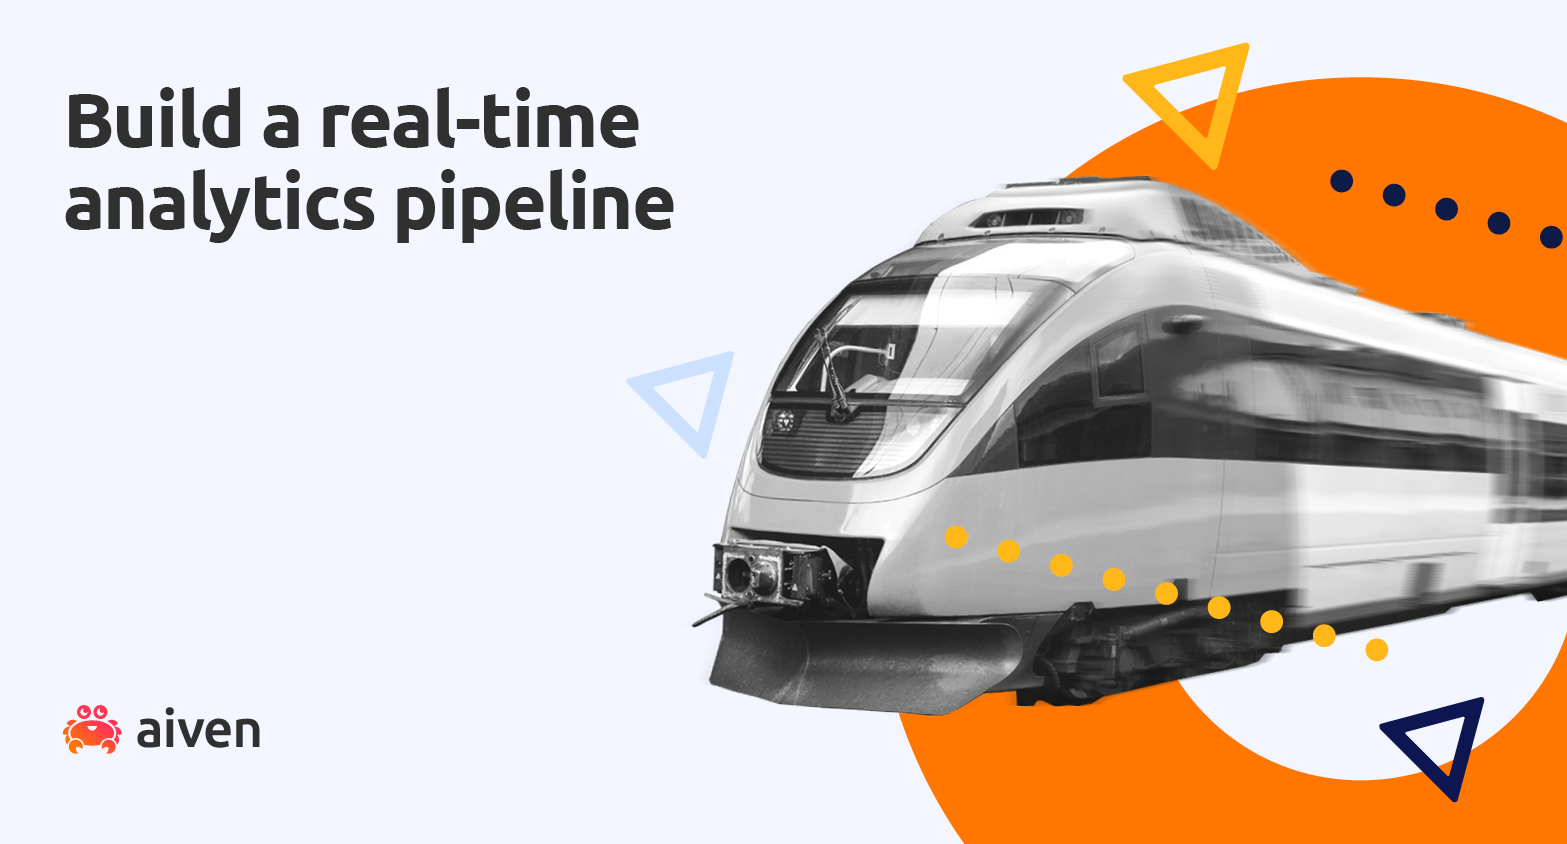 We demo a real-time data analytics pipeline with a public transport twist